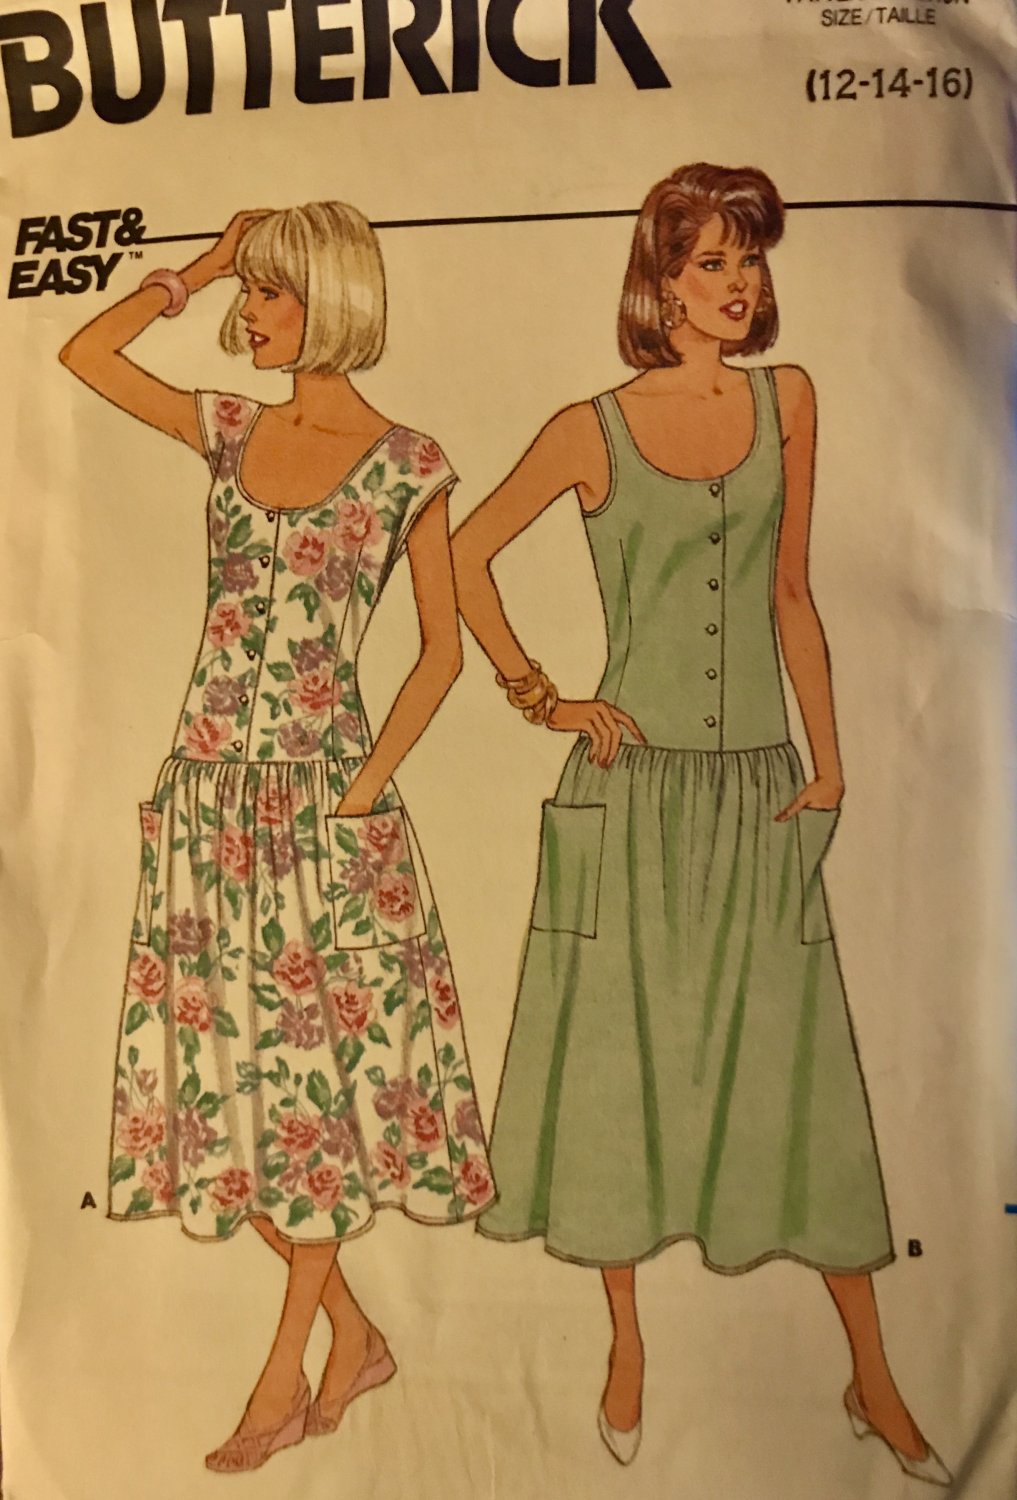 Butterick 3864 Misses' Dress: Dress with dropped waist Sewing Pattern size 12 14 16